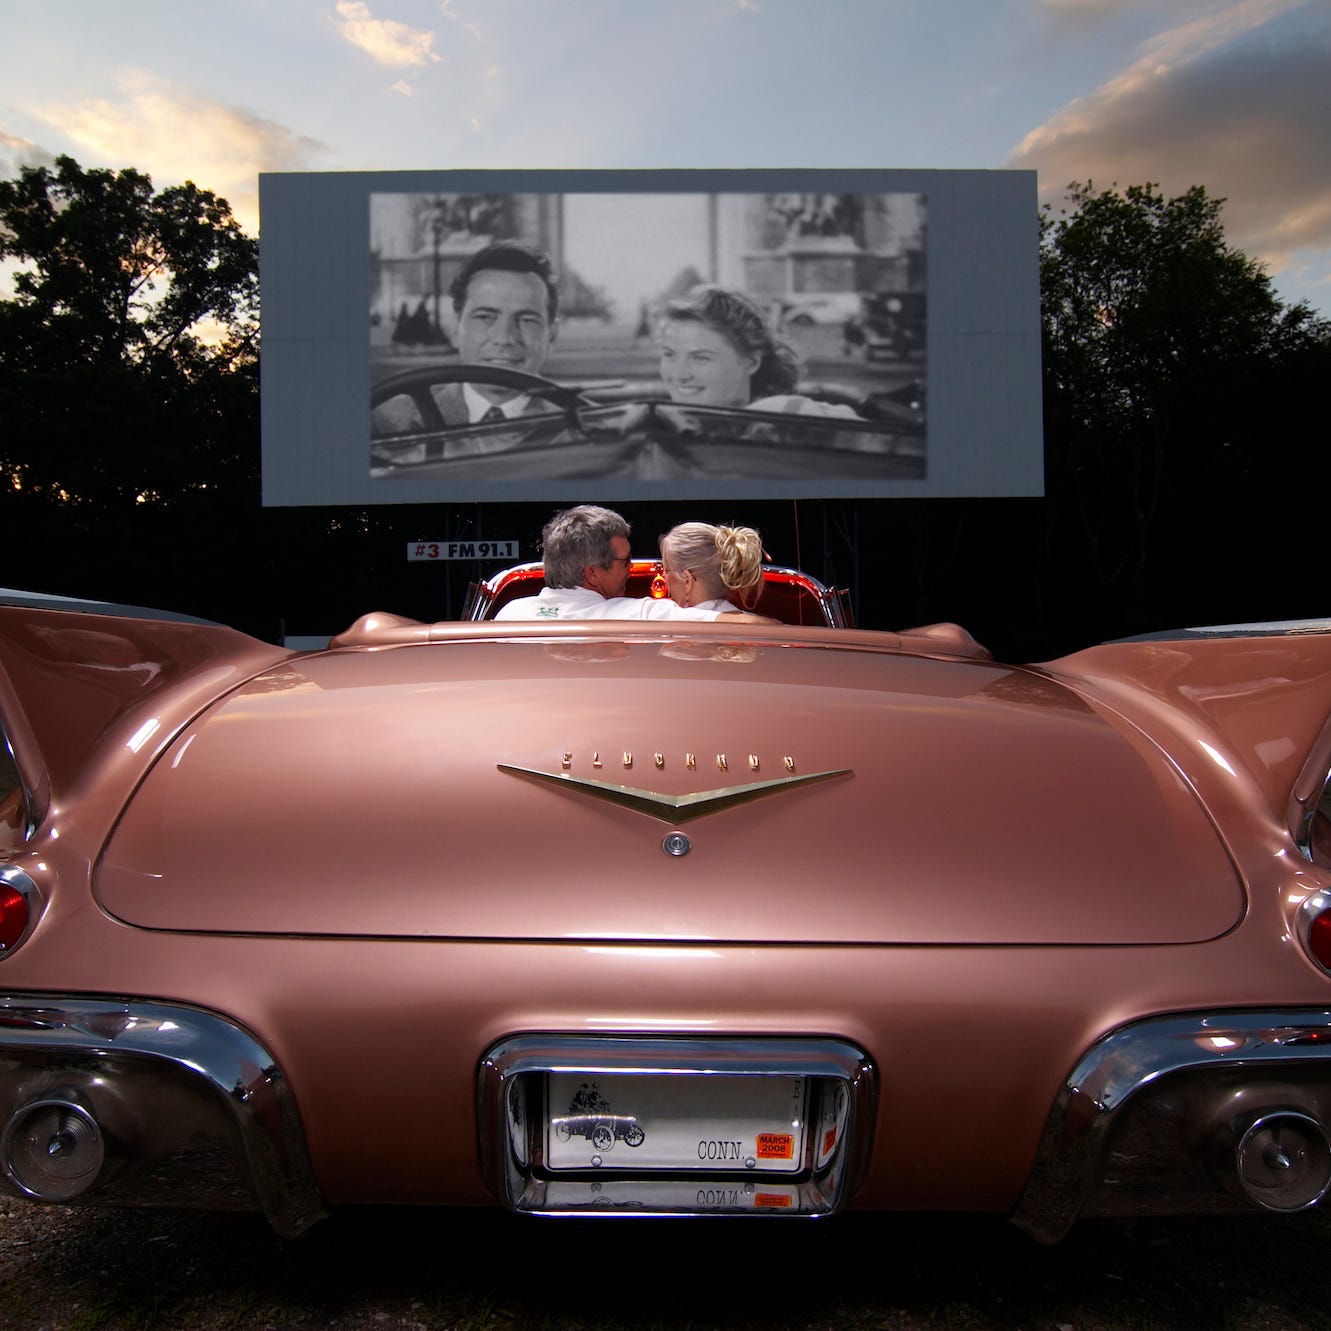 Connecticut: Guests settle in for a film in a vintage Cadillac at the Mansfield Drive-In Theatre & Marketplace in Mansfield, Connecticut.